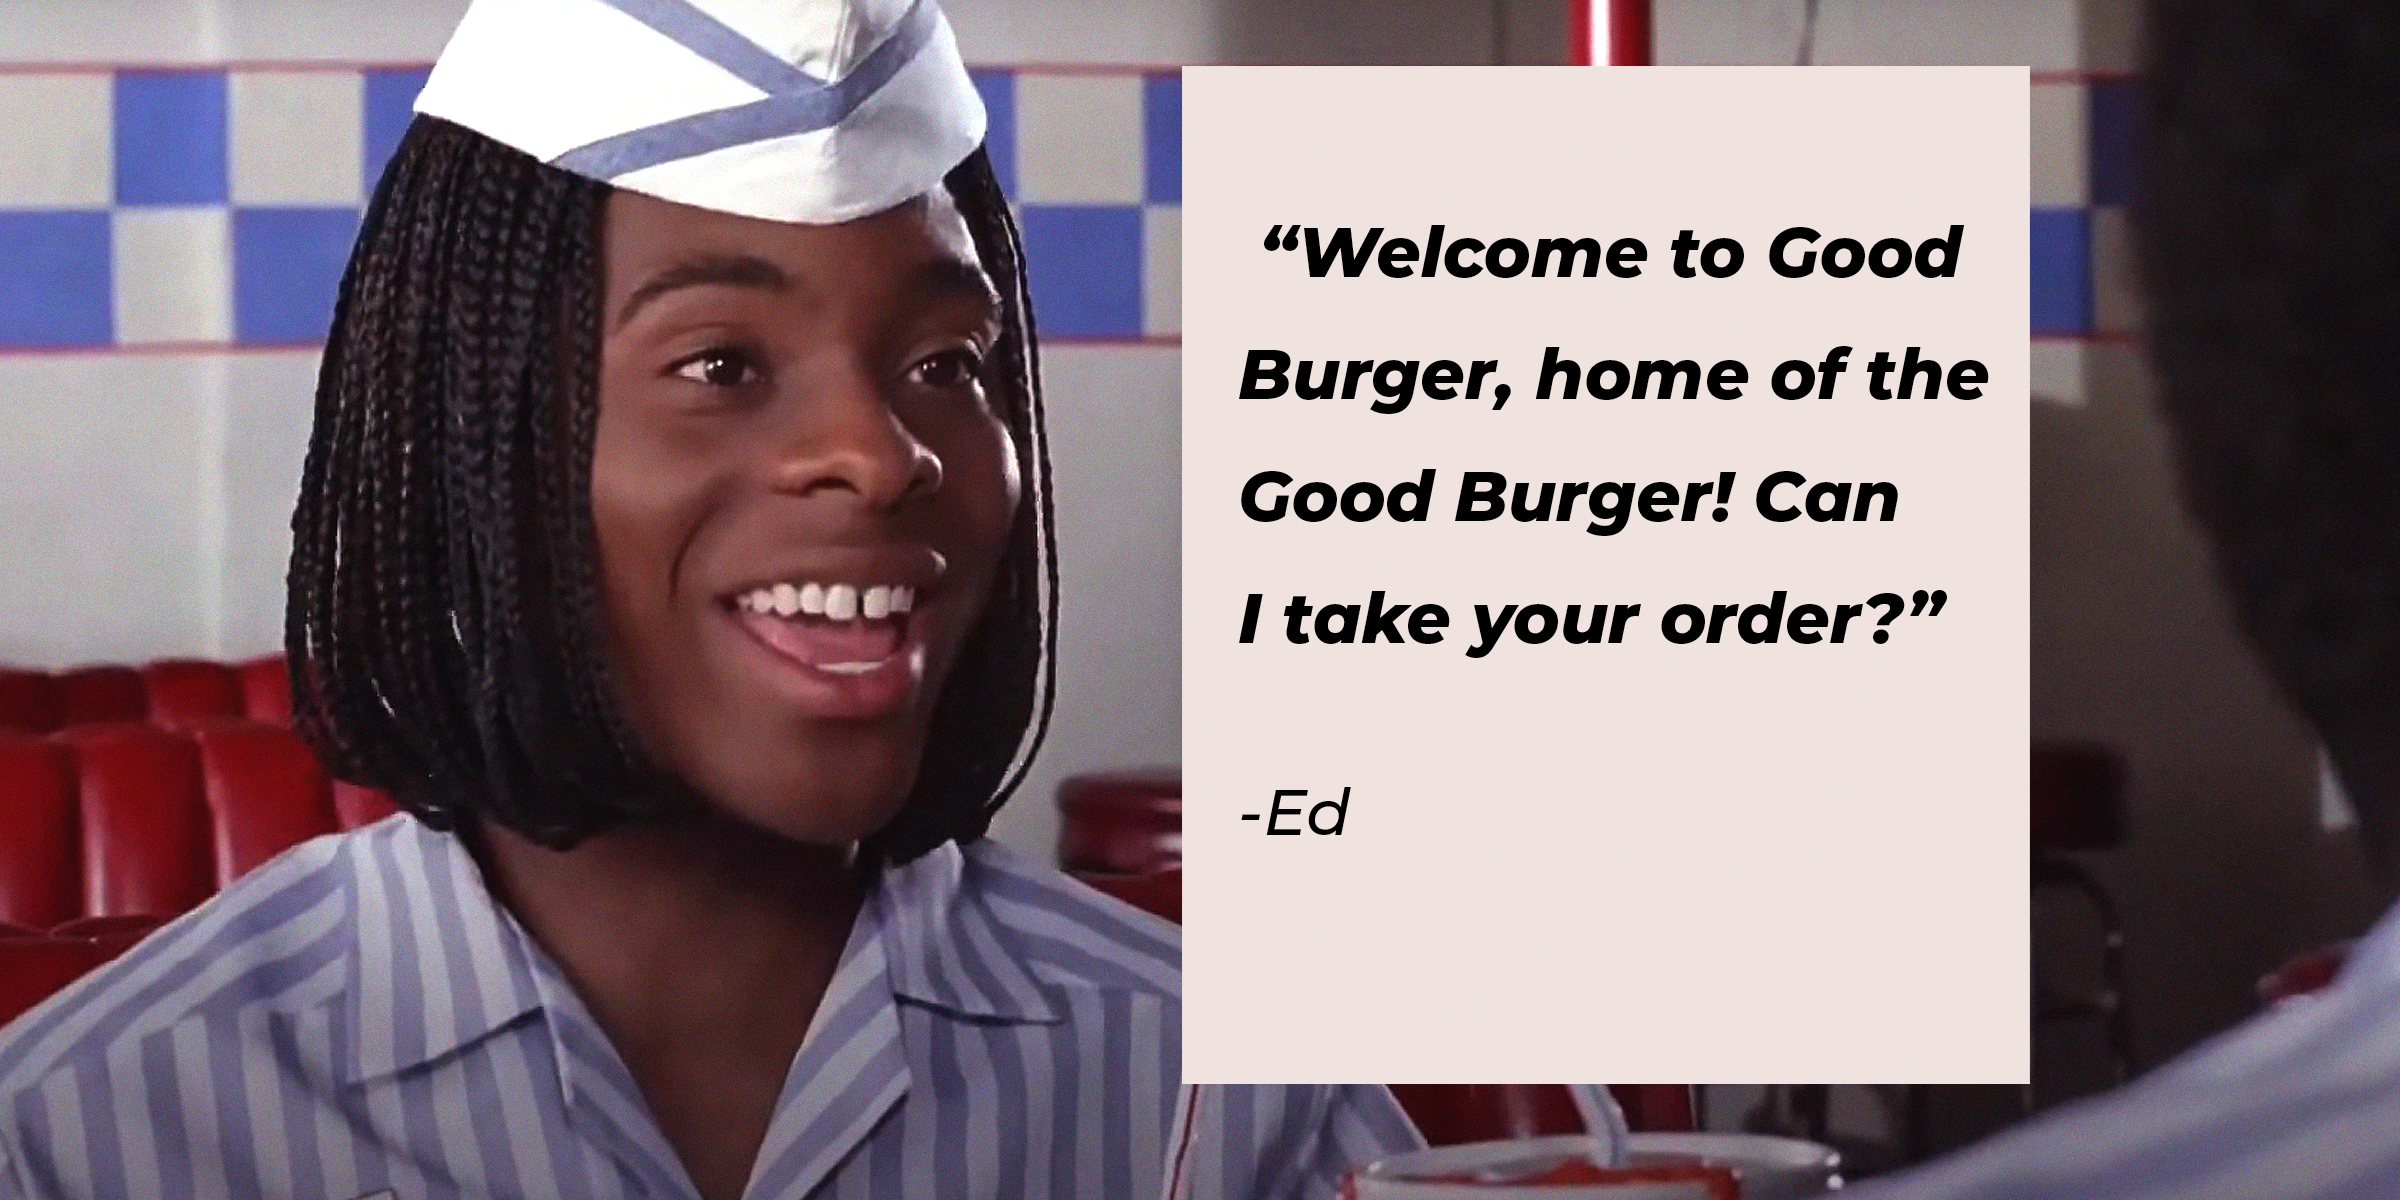 An image of Ed with his quote: “Welcome to Good Burger, home of the Good Burger! Can I take your order?” | Source: AmoDays